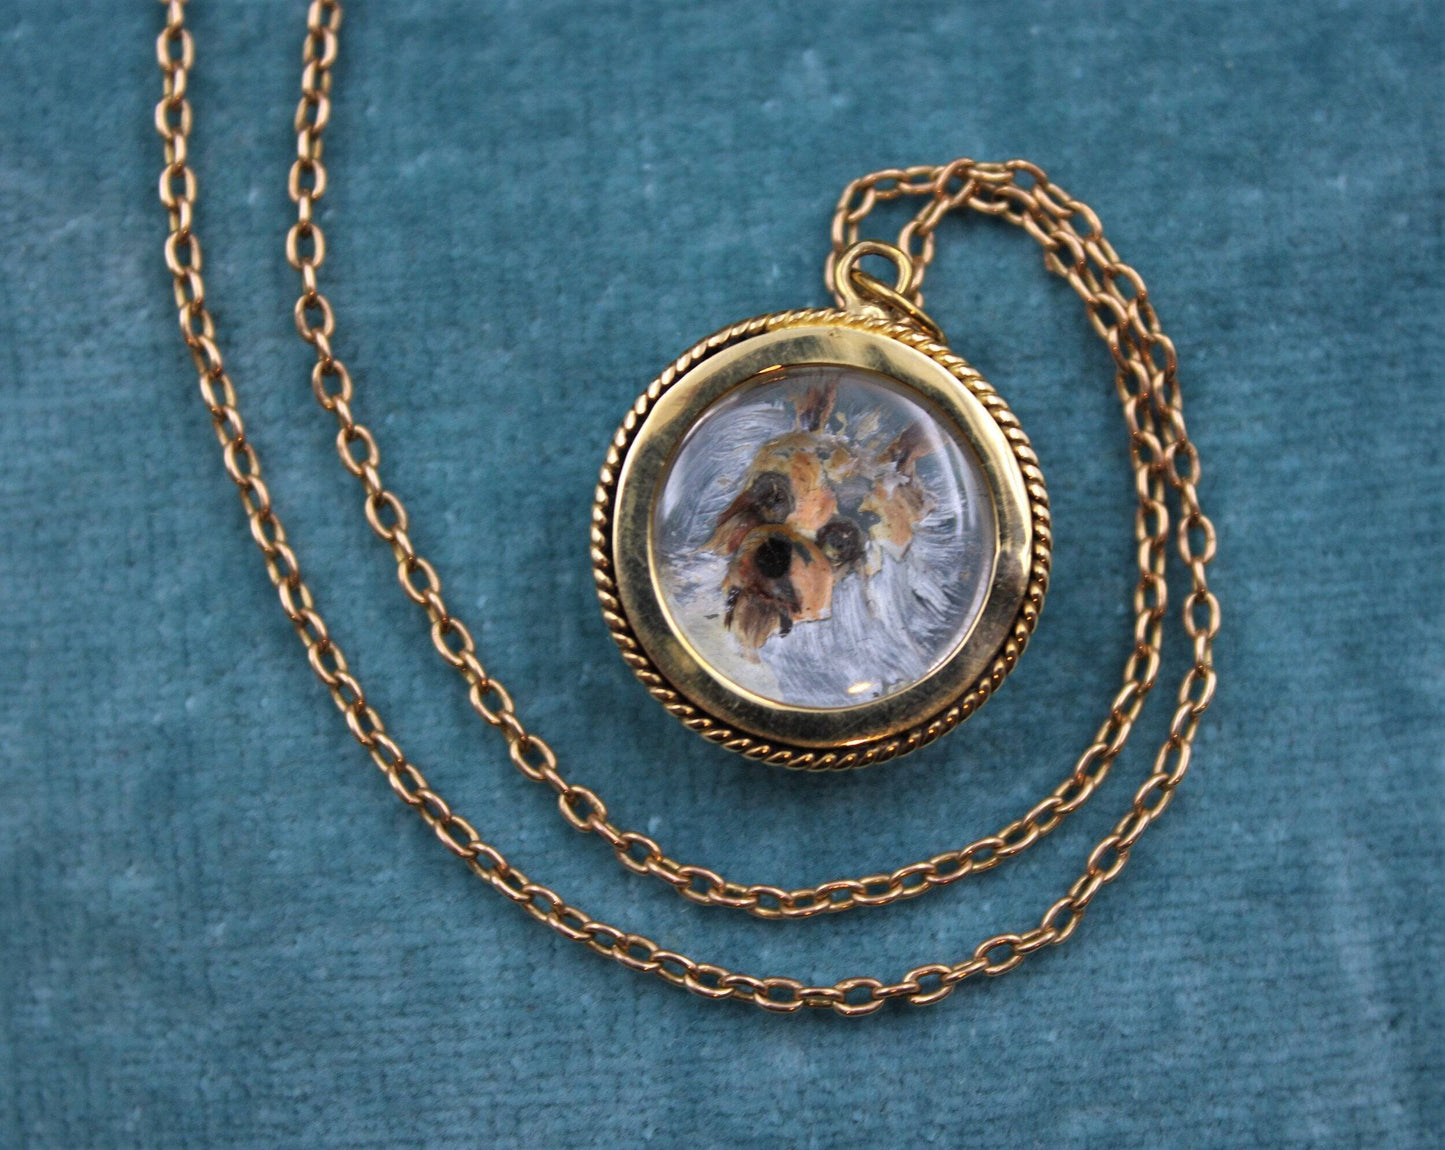 A very fine "Essex Crystal" Pendant depicting a Dog set in 15ct Yellow Gold, English, Circa 1890 - Robin Haydock Antiques